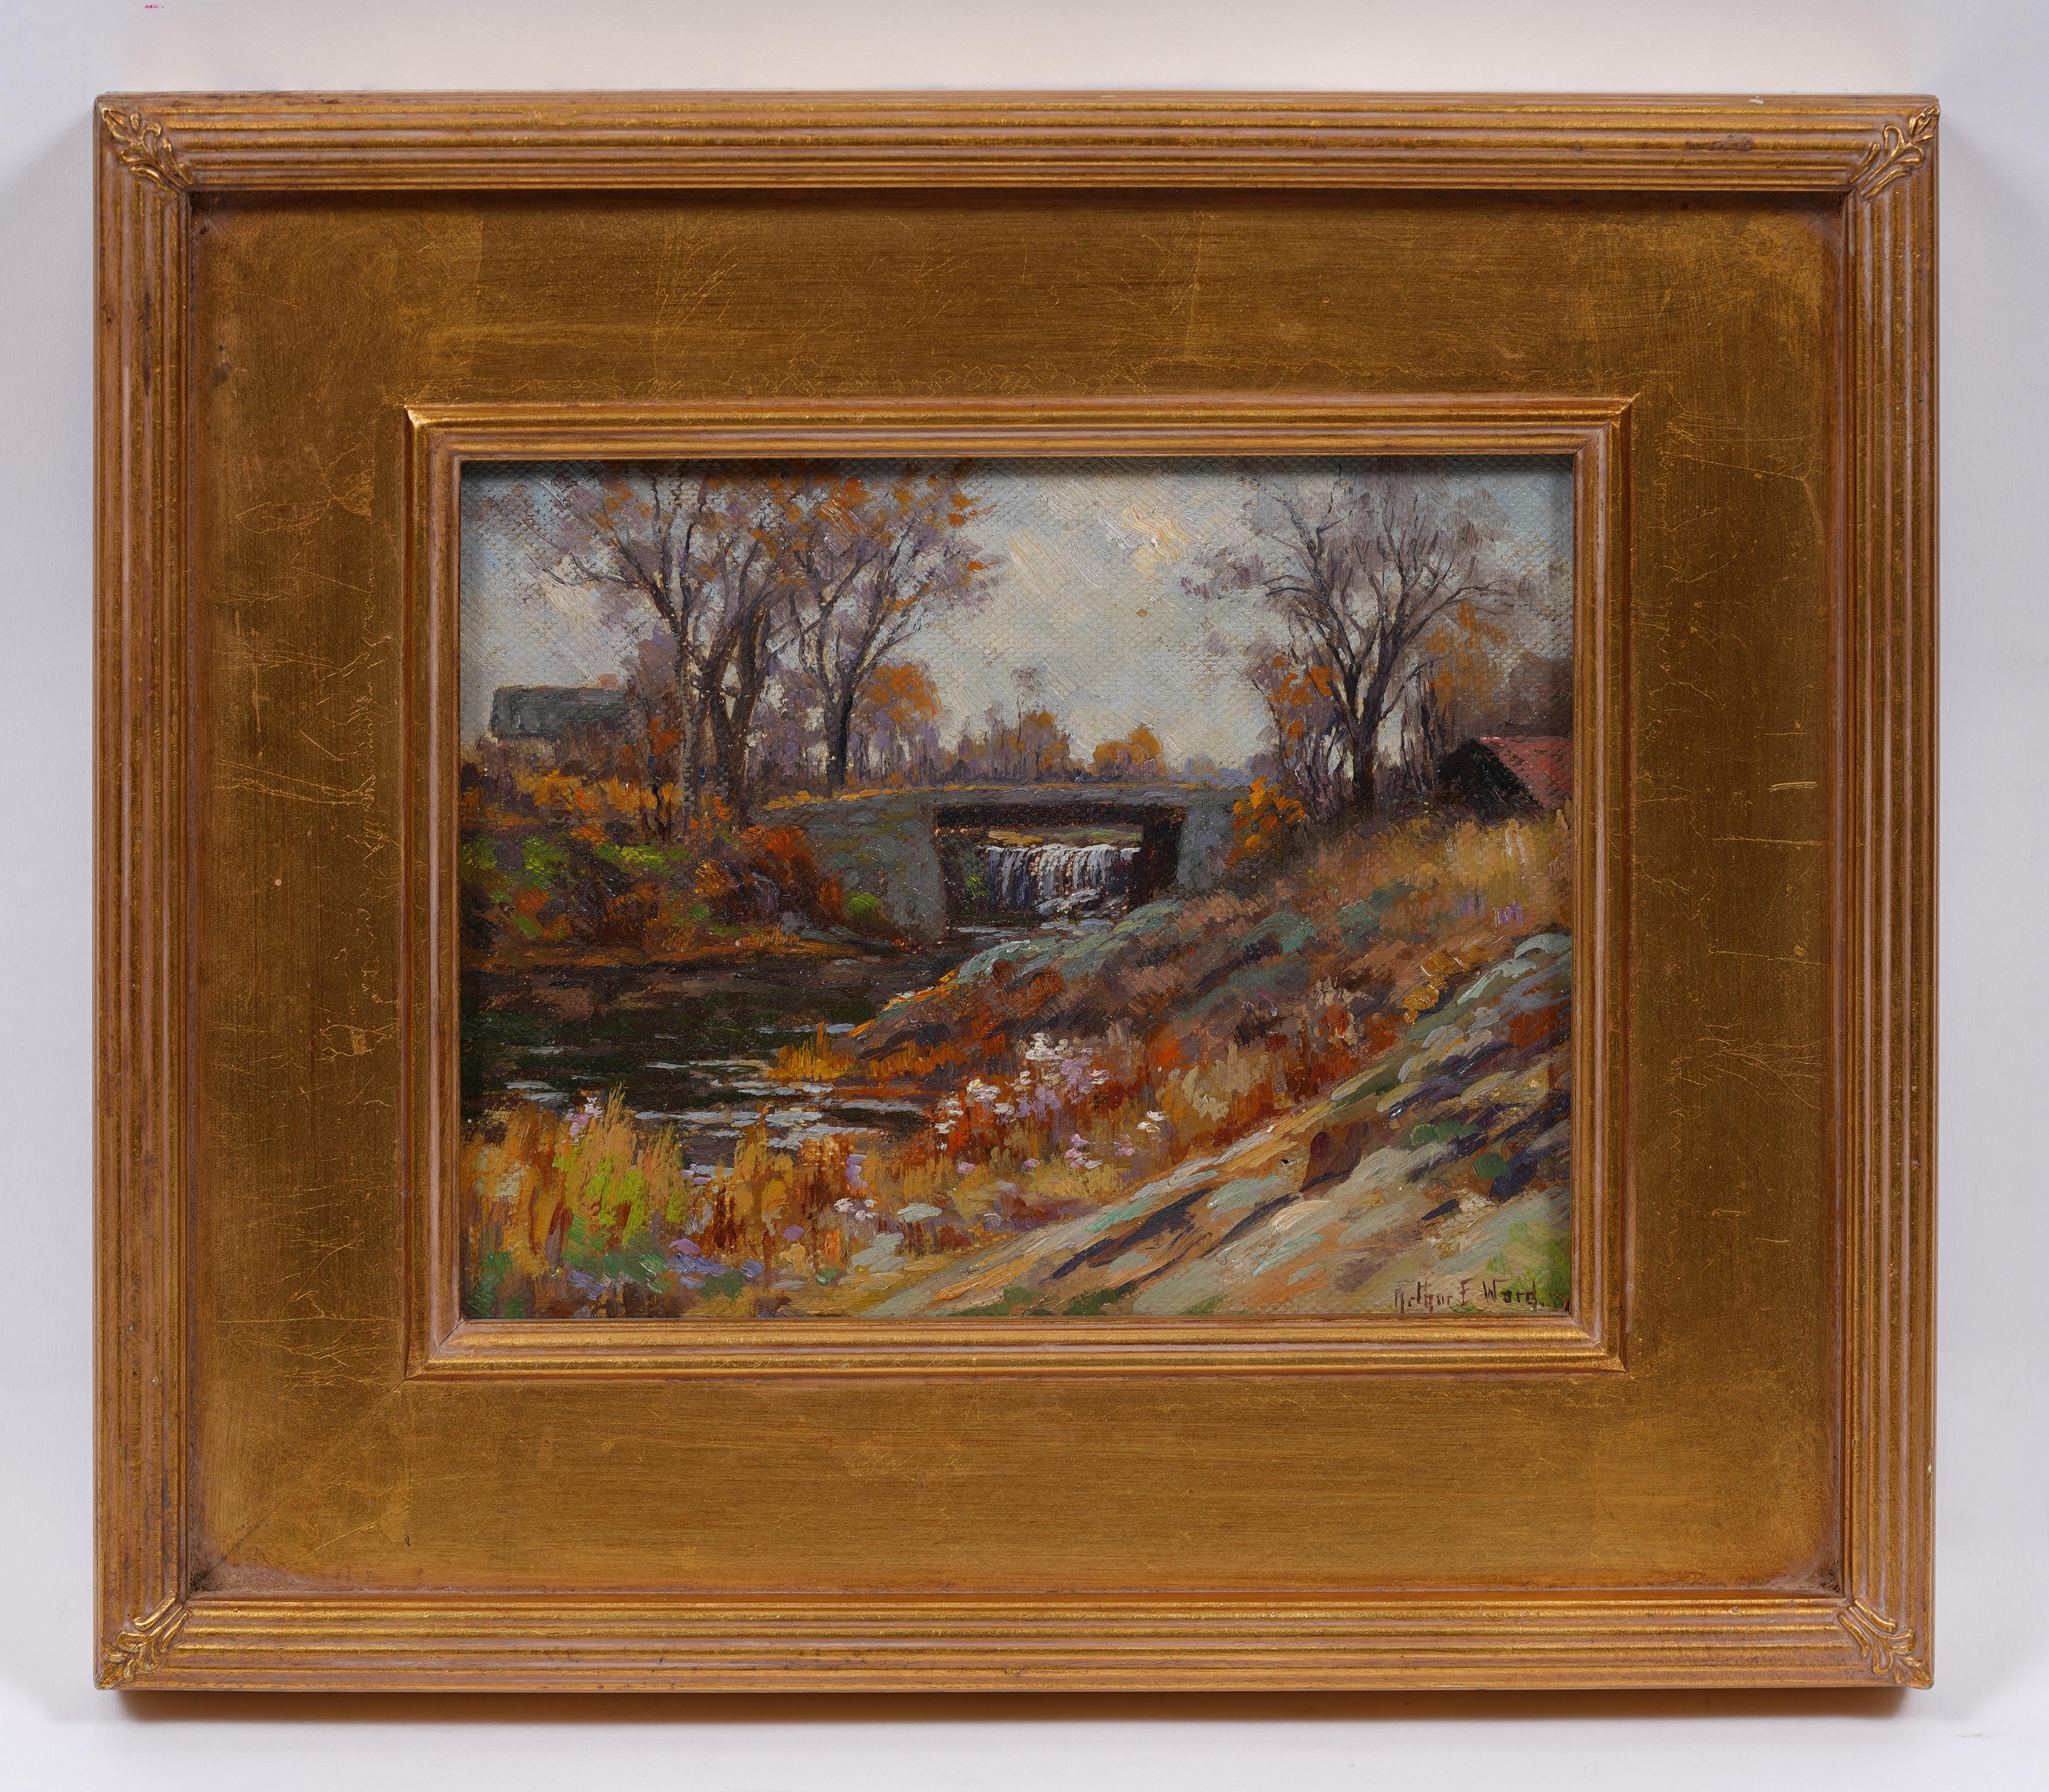 Antique American impressionist landscape oil painting by Arthur E. Ward (1863 - 1928).  OIl on board.  Framed.  Signed.